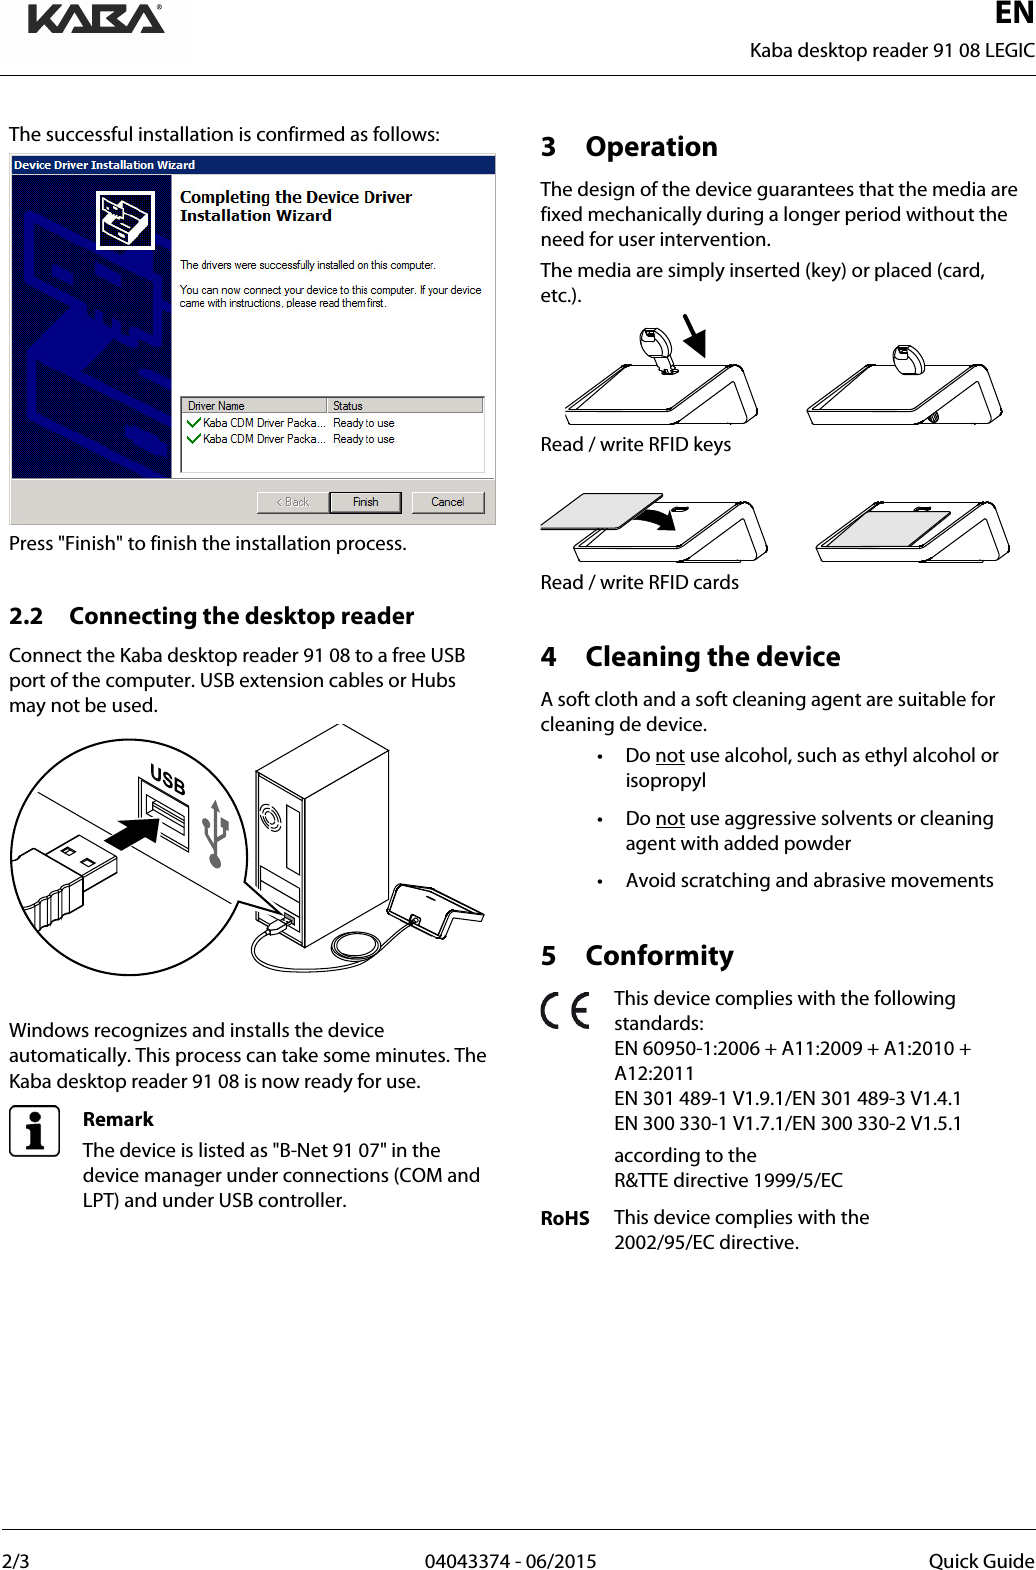  EN Kaba desktop reader 91 08 LEGIC  2/3  04043374 - 06/2015 Quick Guide   The successful installation is confirmed as follows:  Press &quot;Finish&quot; to finish the installation process.  2.2 Connecting the desktop reader Connect the Kaba desktop reader 91 08 to a free USB port of the computer. USB extension cables or Hubs may not be used.   Windows recognizes and installs the device automatically. This process can take some minutes. The Kaba desktop reader 91 08 is now ready for use.  Remark The device is listed as &quot;B-Net 91 07&quot; in the device manager under connections (COM and LPT) and under USB controller.   3 Operation The design of the device guarantees that the media are fixed mechanically during a longer period without the need for user intervention. The media are simply inserted (key) or placed (card, etc.).  Read / write RFID keys   Read / write RFID cards  4 Cleaning the device A soft cloth and a soft cleaning agent are suitable for cleaning de device. • Do not use alcohol, such as ethyl alcohol or isopropyl • Do not use aggressive solvents or cleaning agent with added powder • Avoid scratching and abrasive movements  5 Conformity  This device complies with the following standards: EN 60950-1:2006 + A11:2009 + A1:2010 + A12:2011 EN 301 489-1 V1.9.1/EN 301 489-3 V1.4.1 EN 300 330-1 V1.7.1/EN 300 330-2 V1.5.1  according to the  R&amp;TTE directive 1999/5/EC RoHS This device complies with the  2002/95/EC directive.      